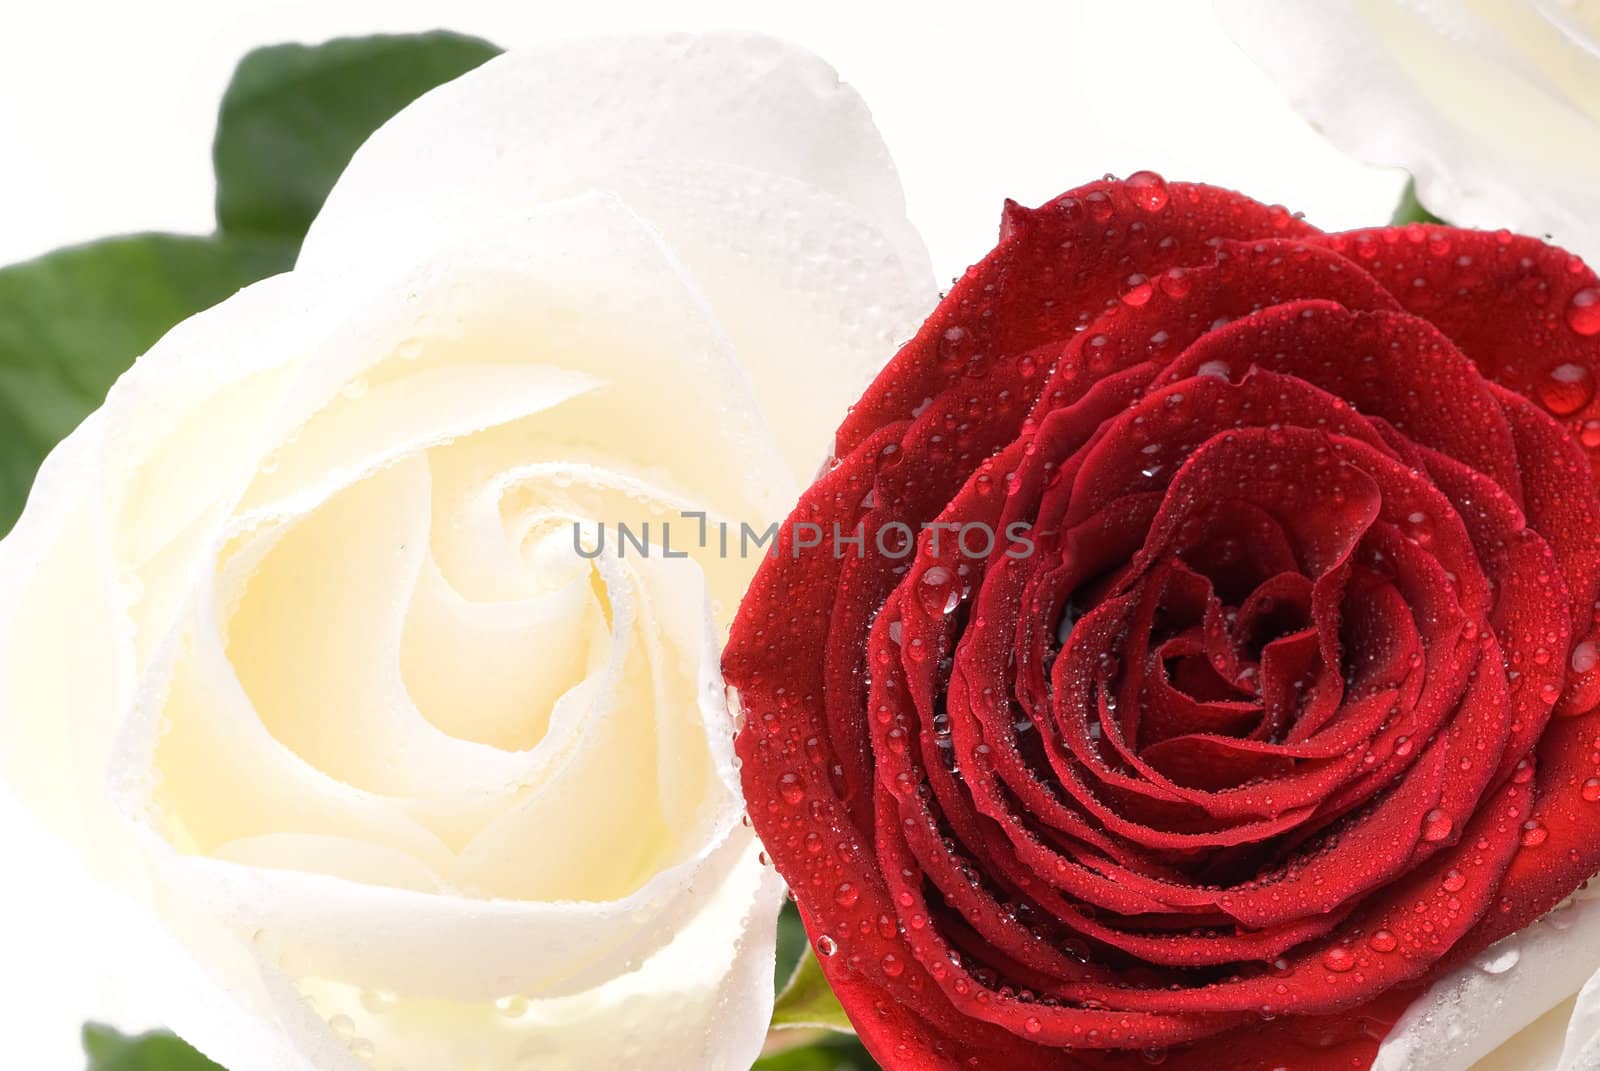 Two roses, red and white with dewdrops